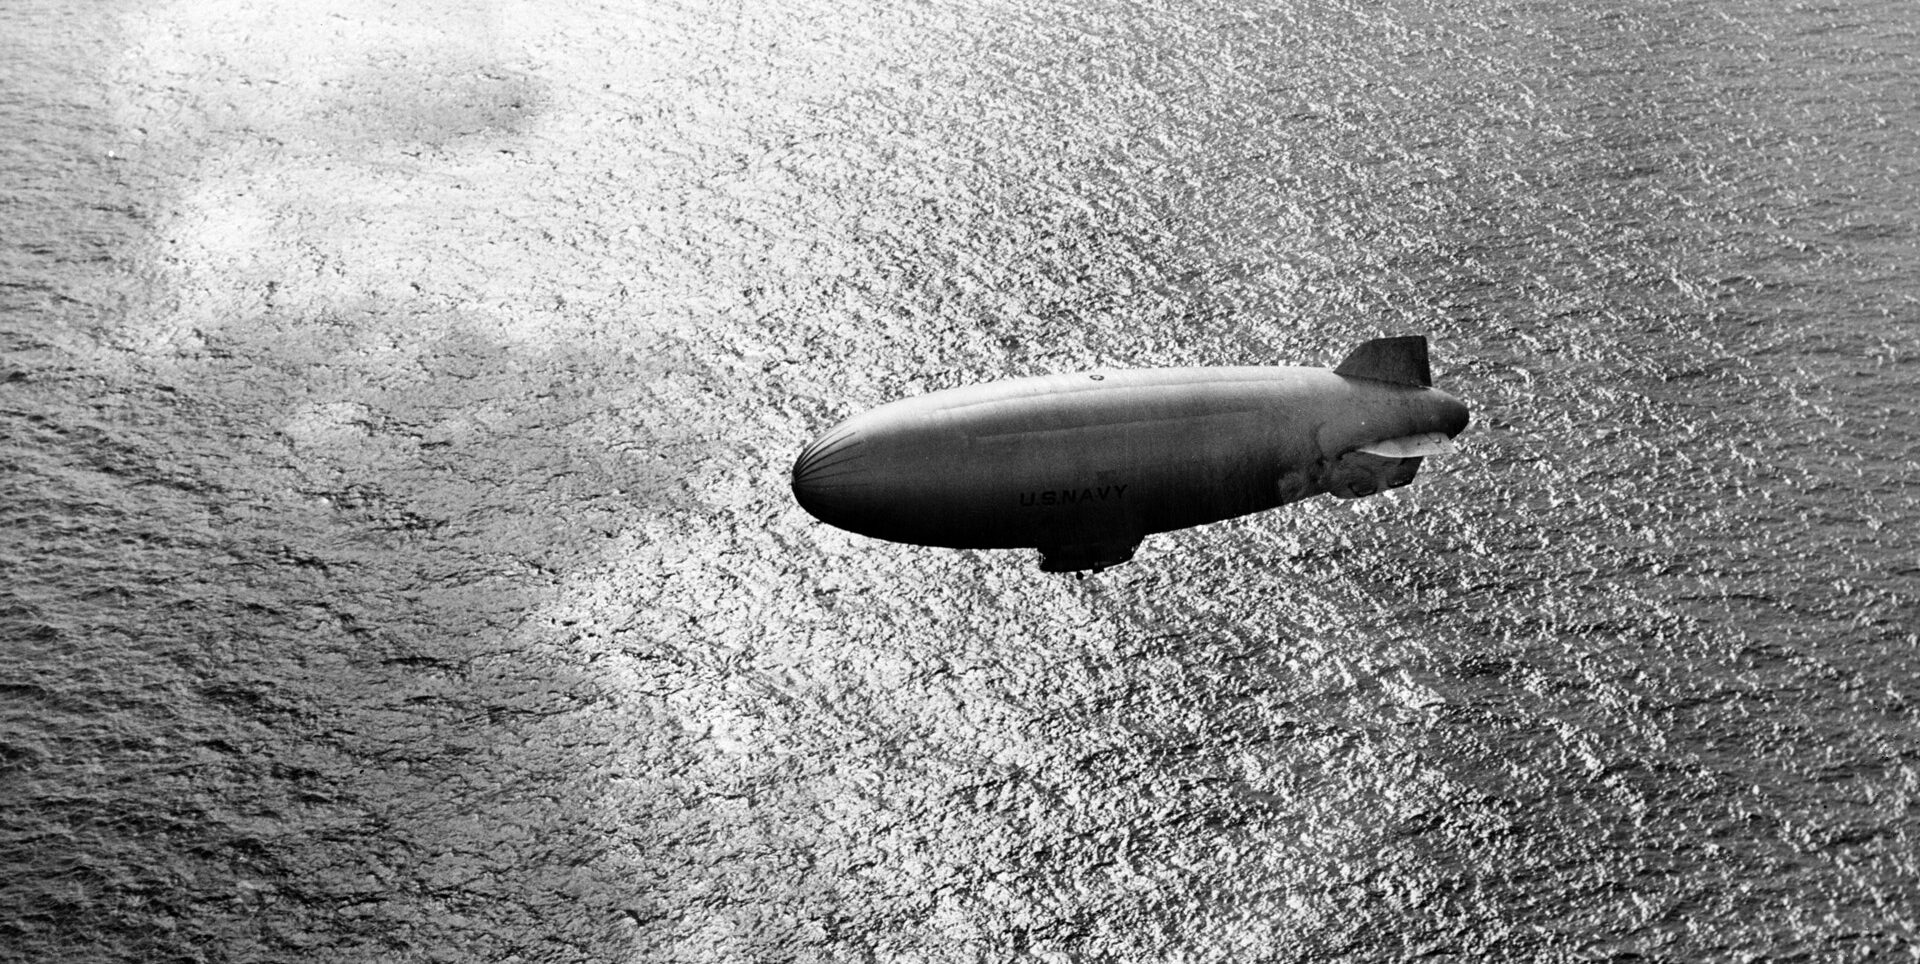 An airship of the the U.S. Navy patrols the Atlantic Ocean in search of German U-boats. This photo was taken in 1943, and at the time the Allies were wresting the initiative in the Battle of the Atlantic from the Nazis via improved sub-hunting technology and weapons systems.